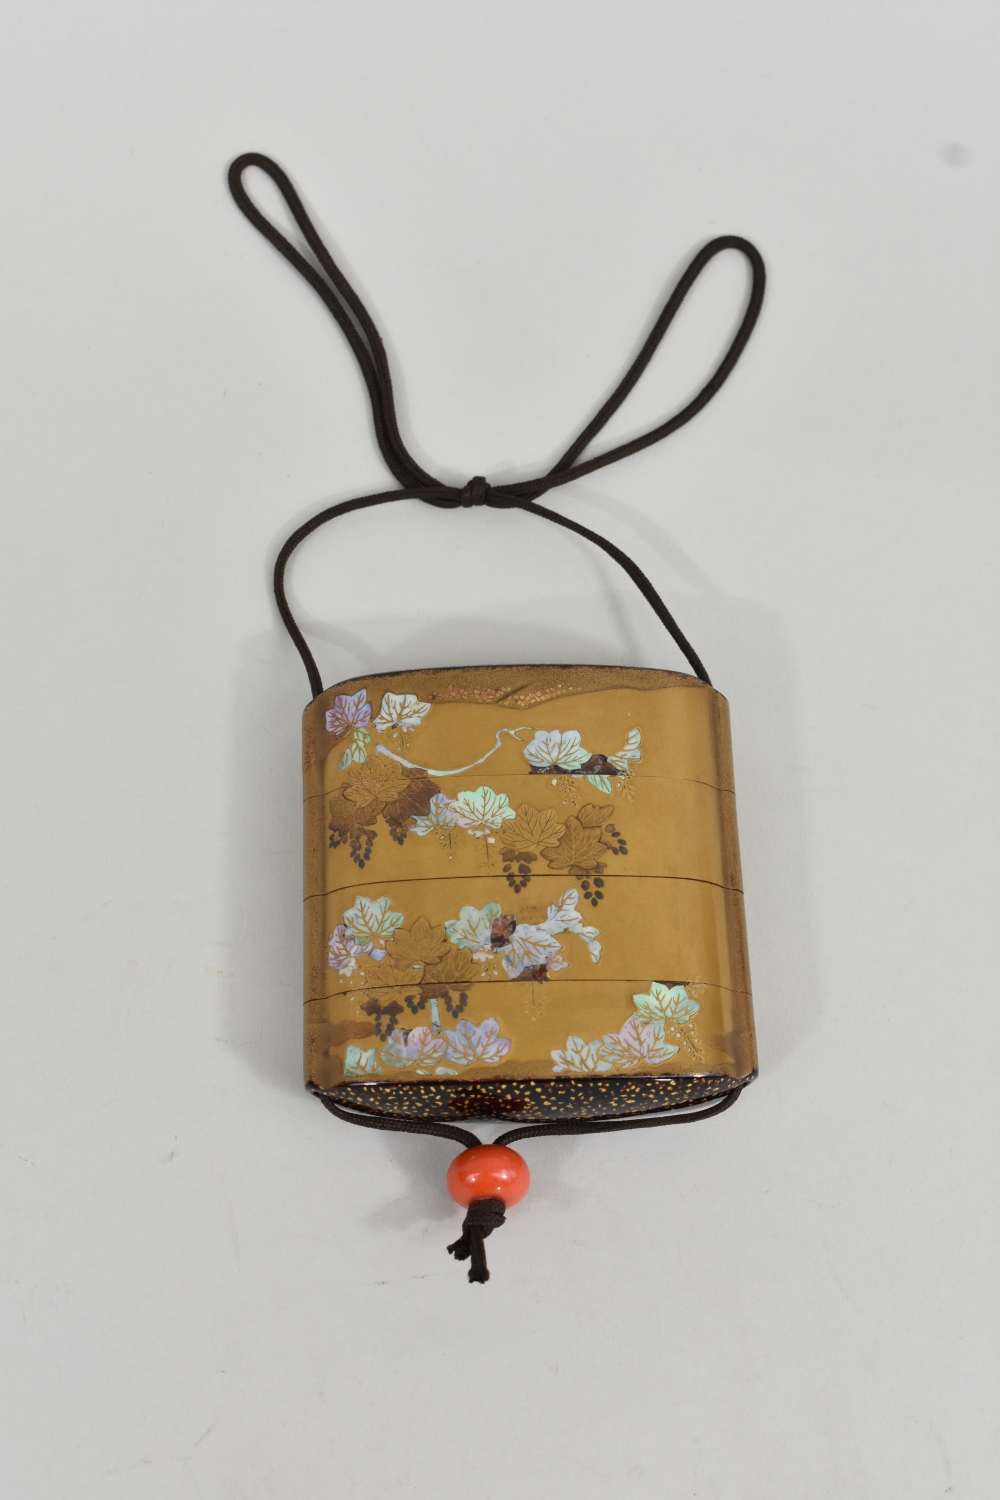 FINE JAPANESE MOTHER OF PEARL DECORATED